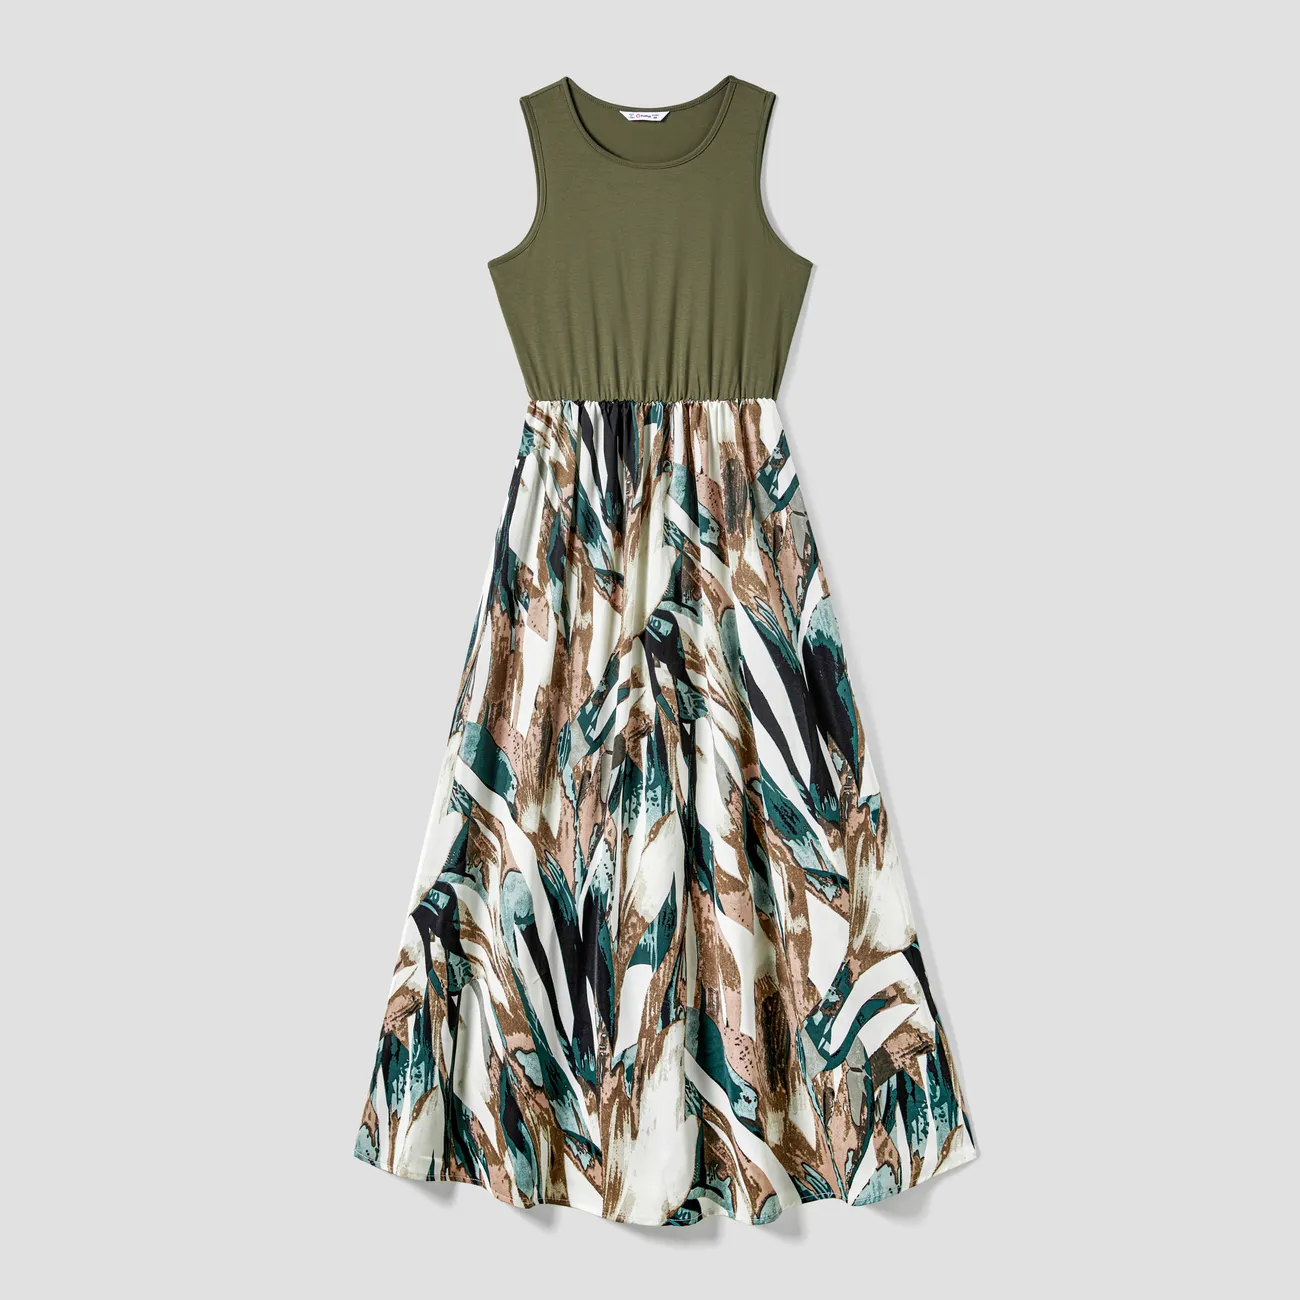 Family Matching Colorblock T-Shirt and Tank Top Spliced Floral A-Line Dress Sets Army green big image 1